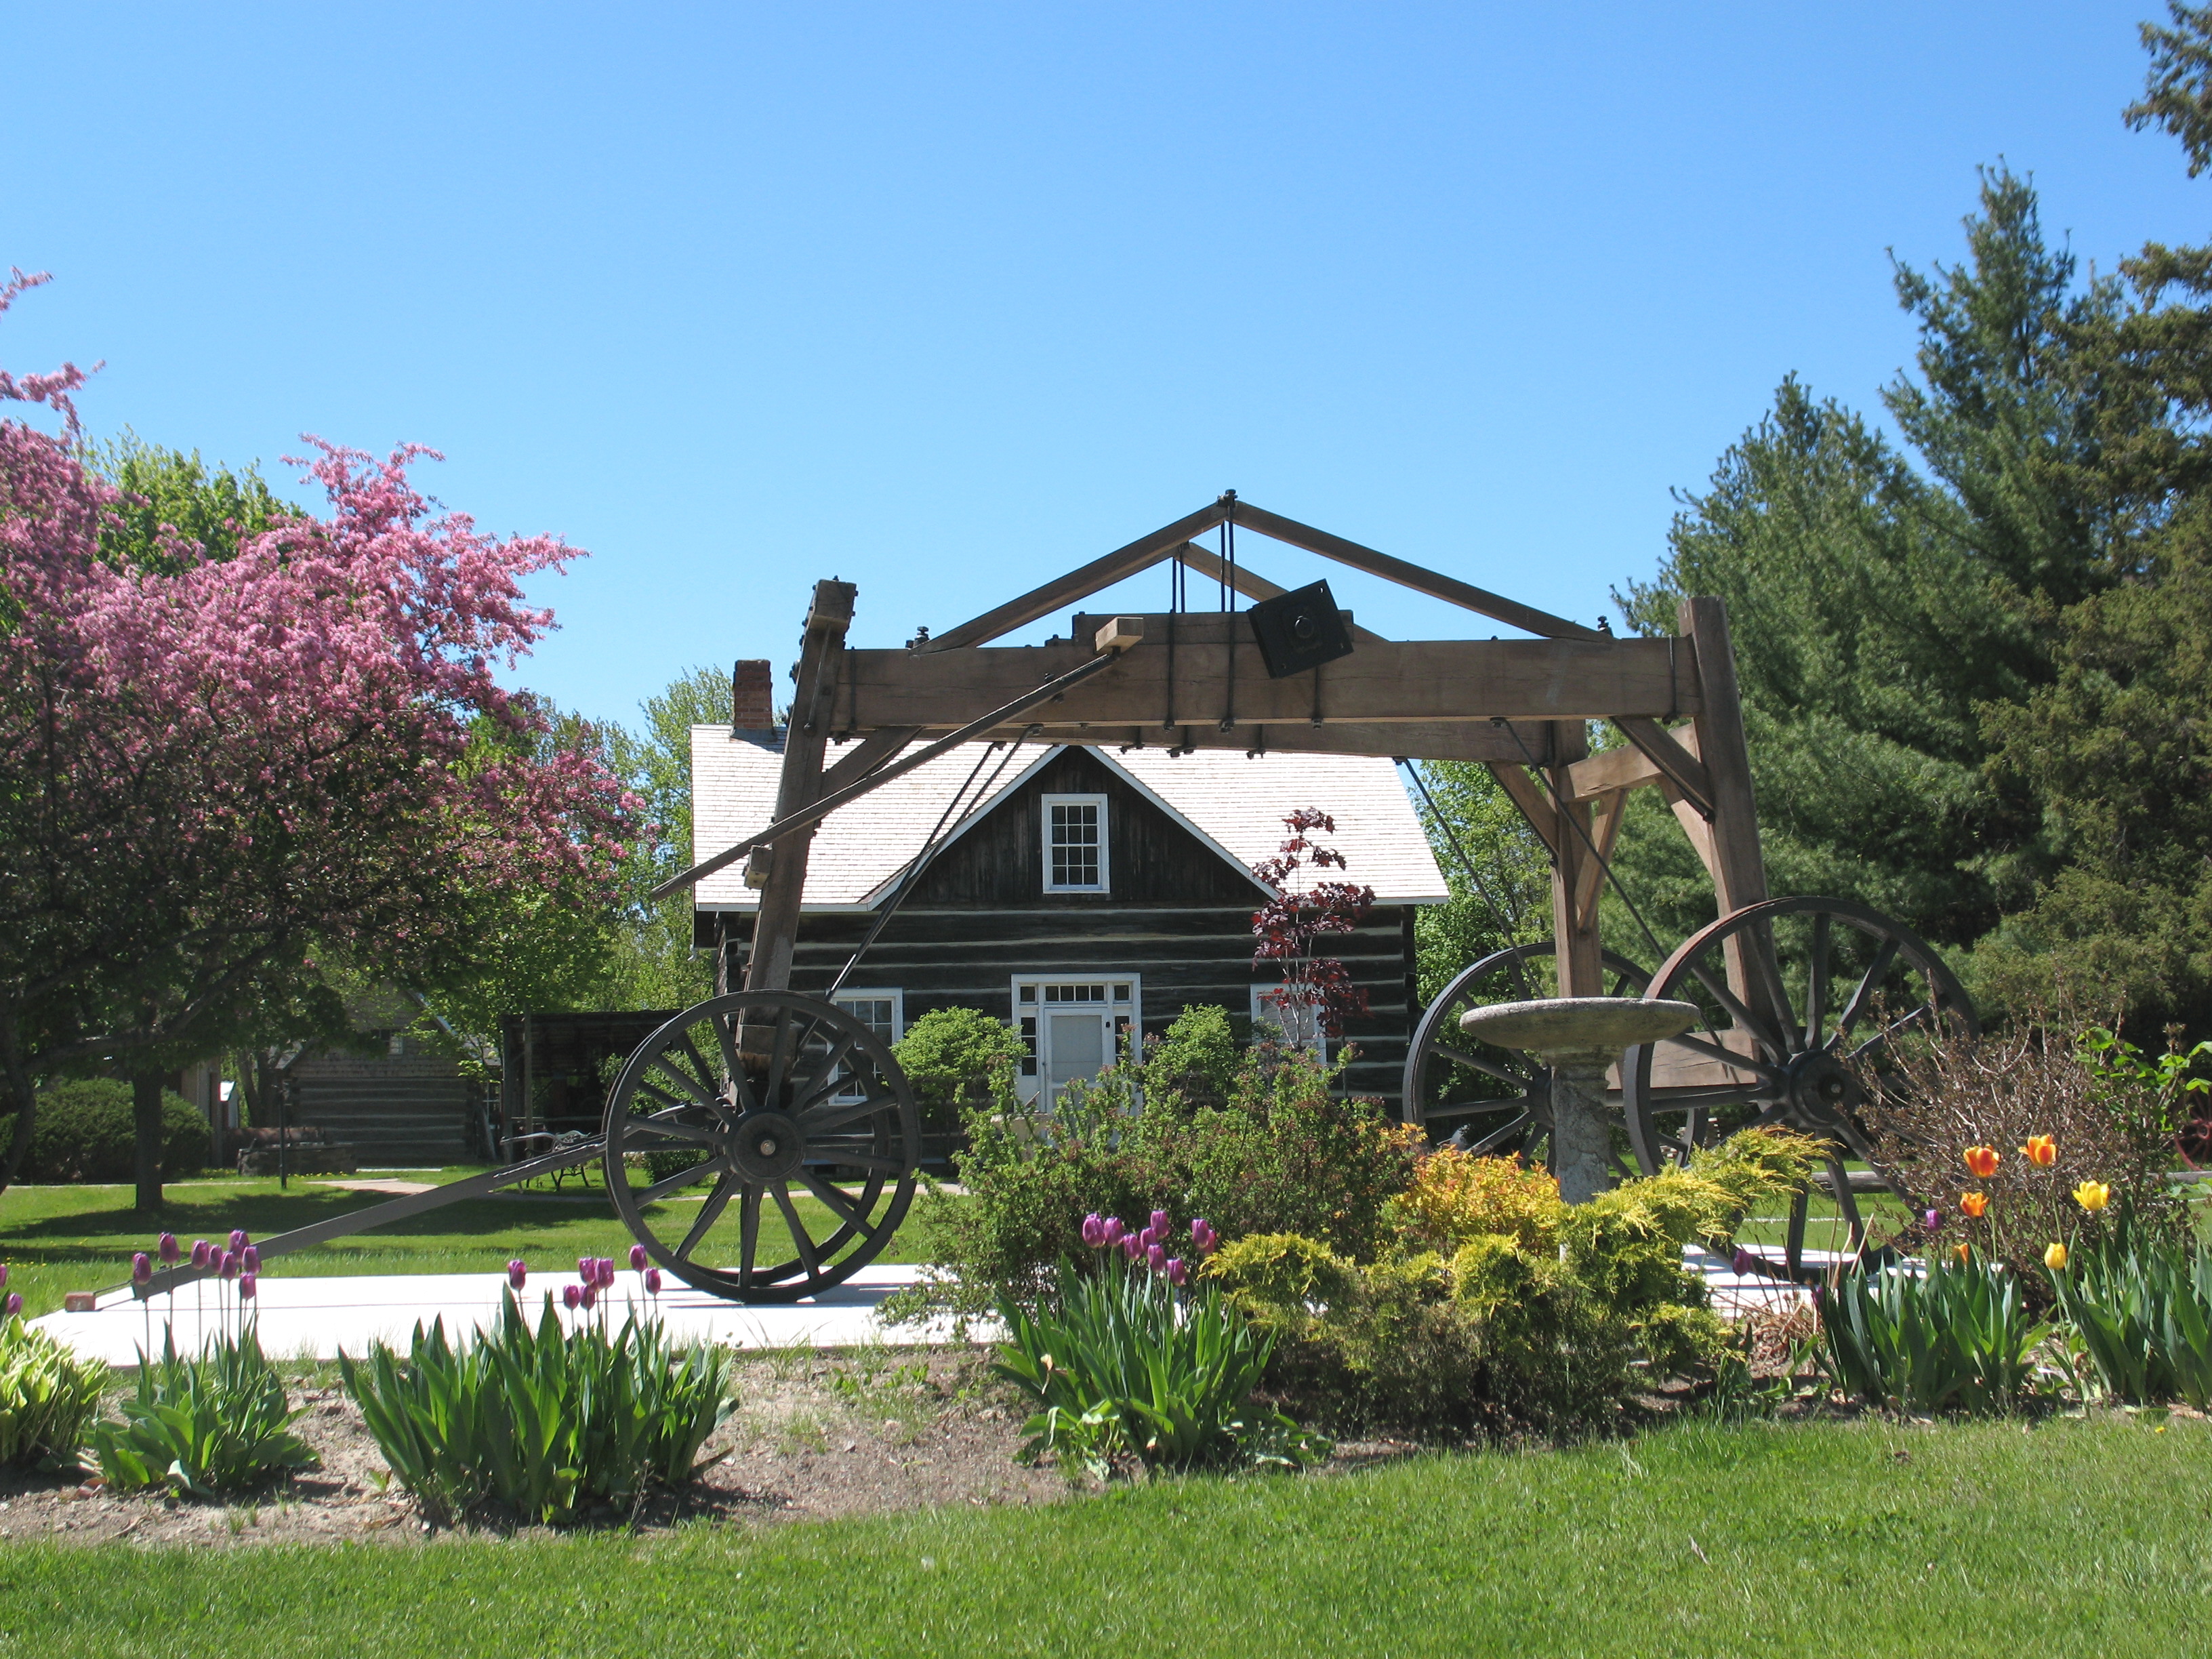 Champlain Trail Museum and Pioneer Village